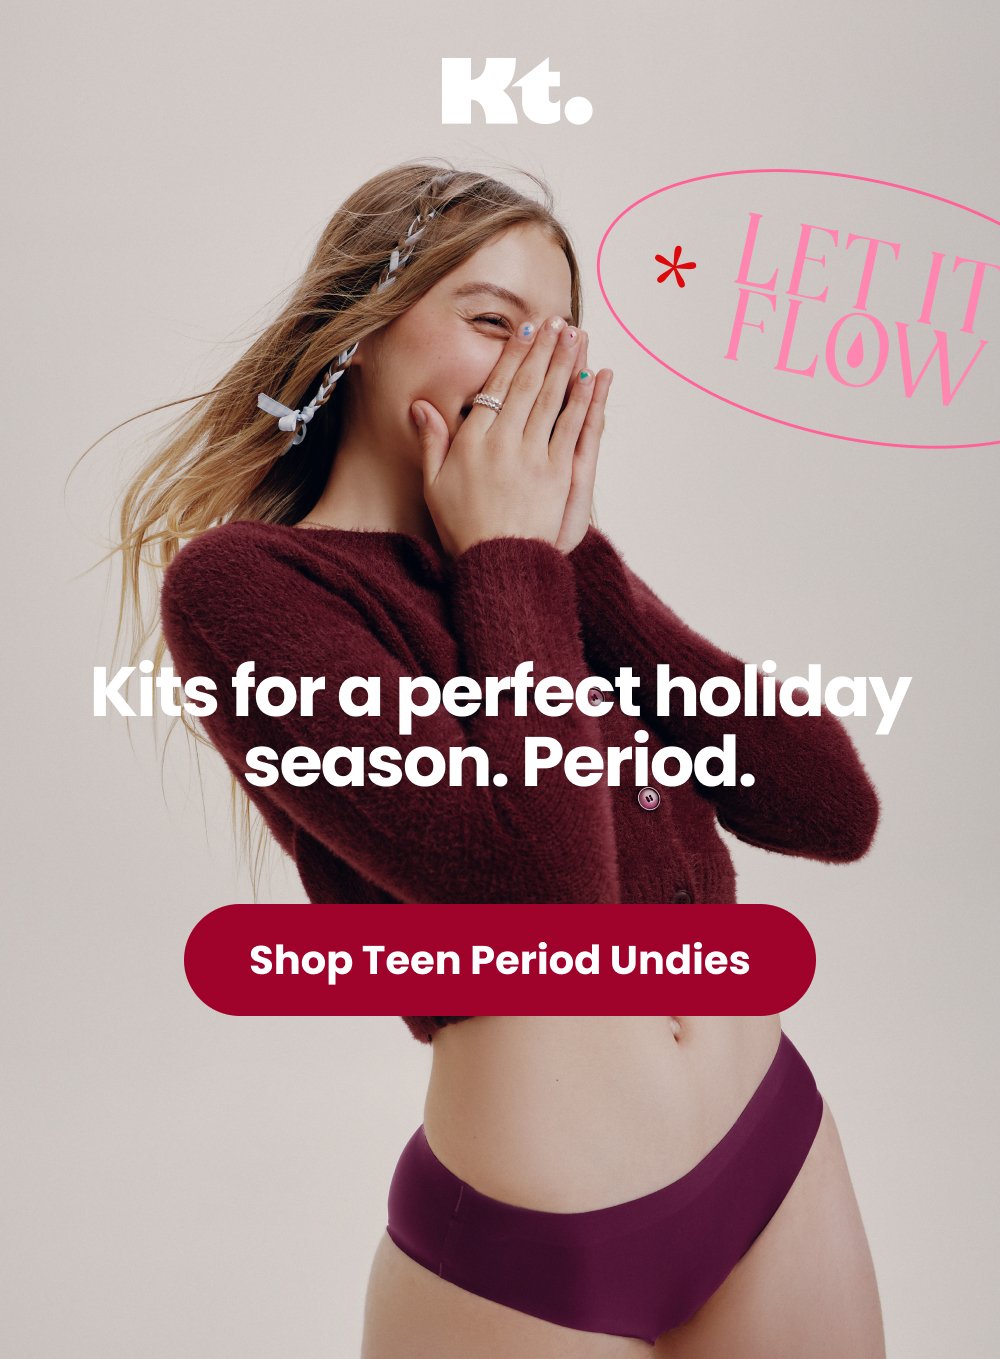 Kt by Knix: Kits for a perfect holiday season. Period. ❄️